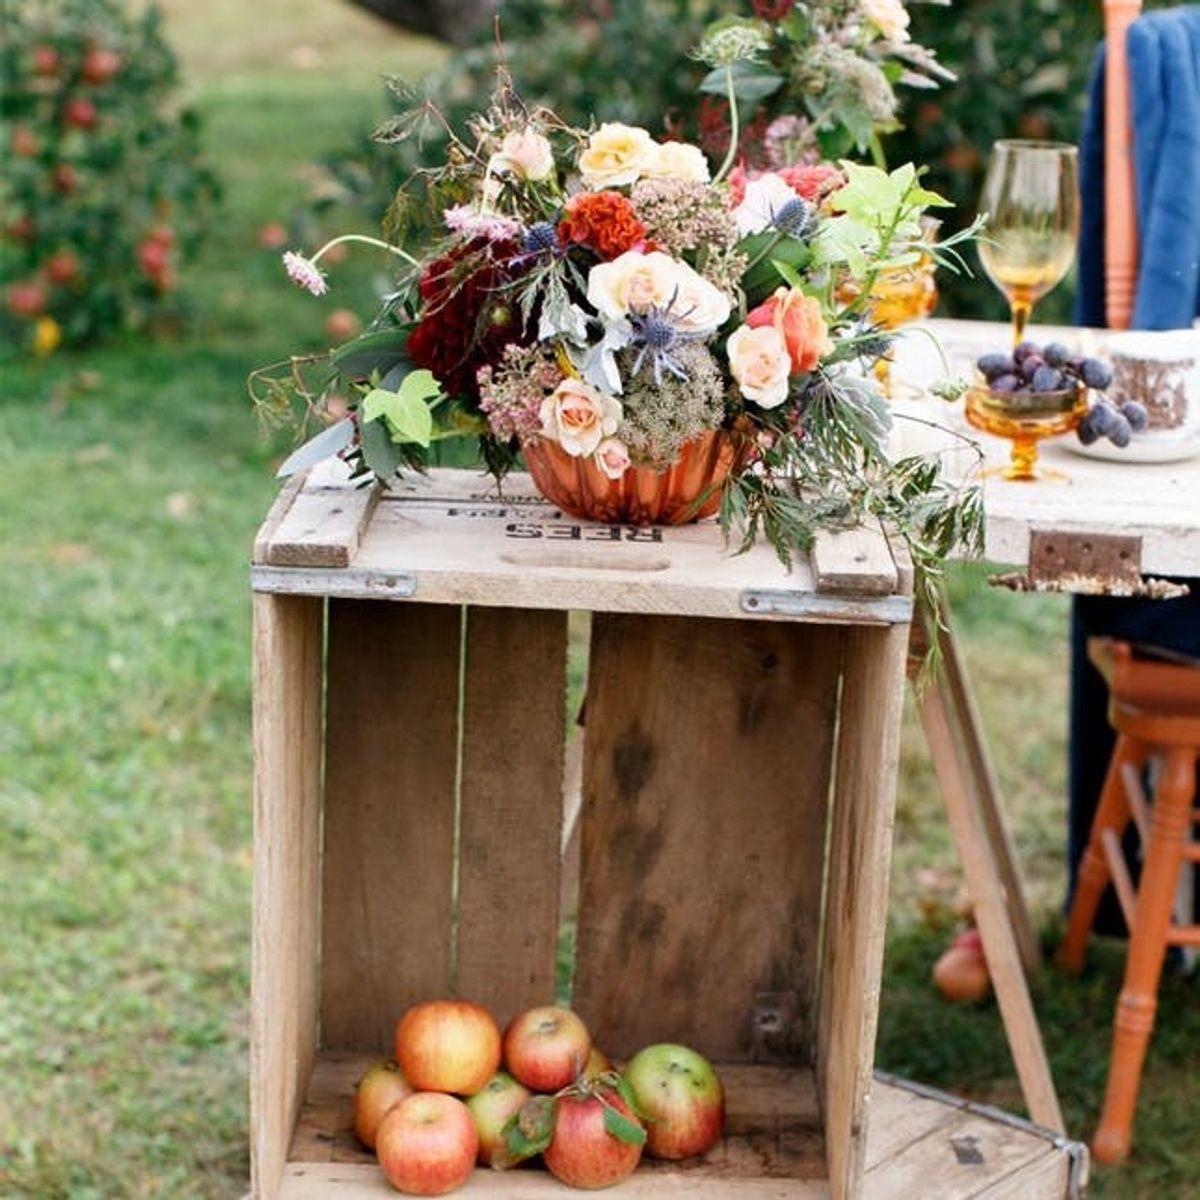 These Apple Orchard Weddings Are the Sweetest Things You’ll See This Fall